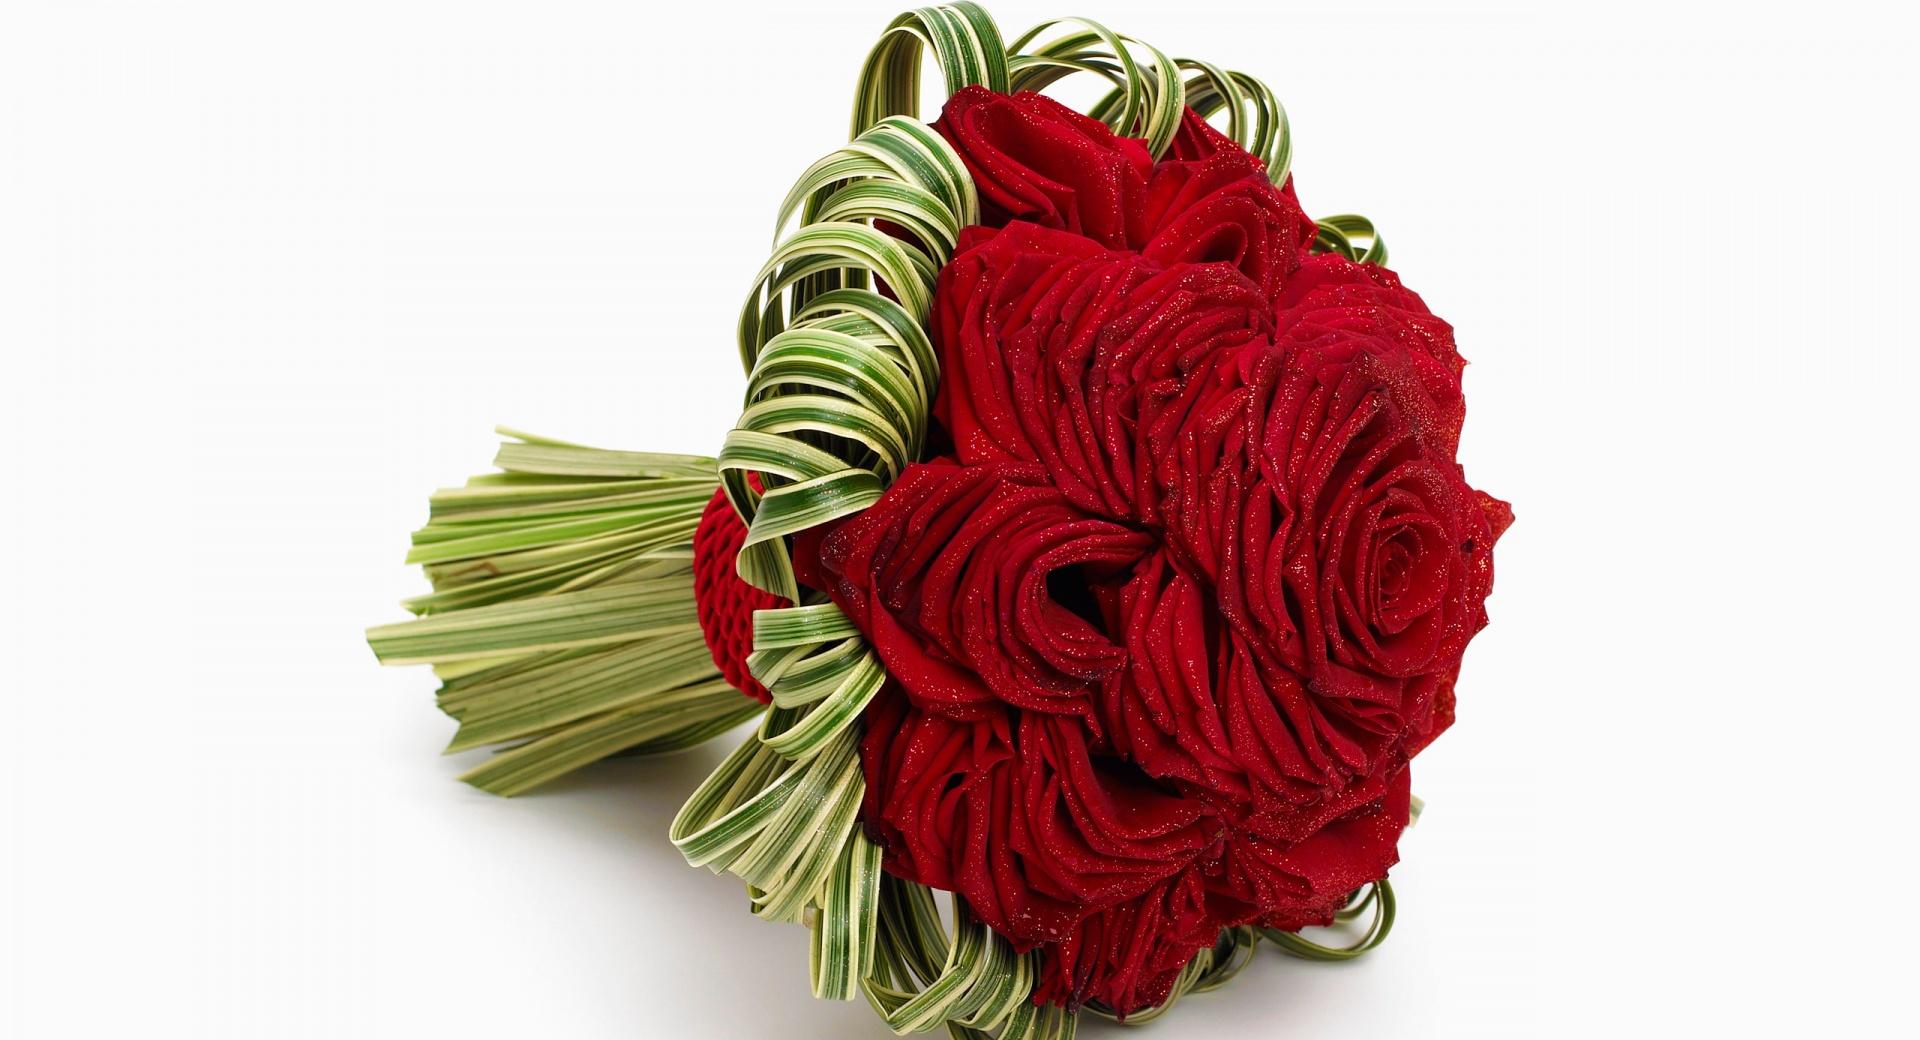 Red Rose Bridal Bouquet wallpapers HD quality